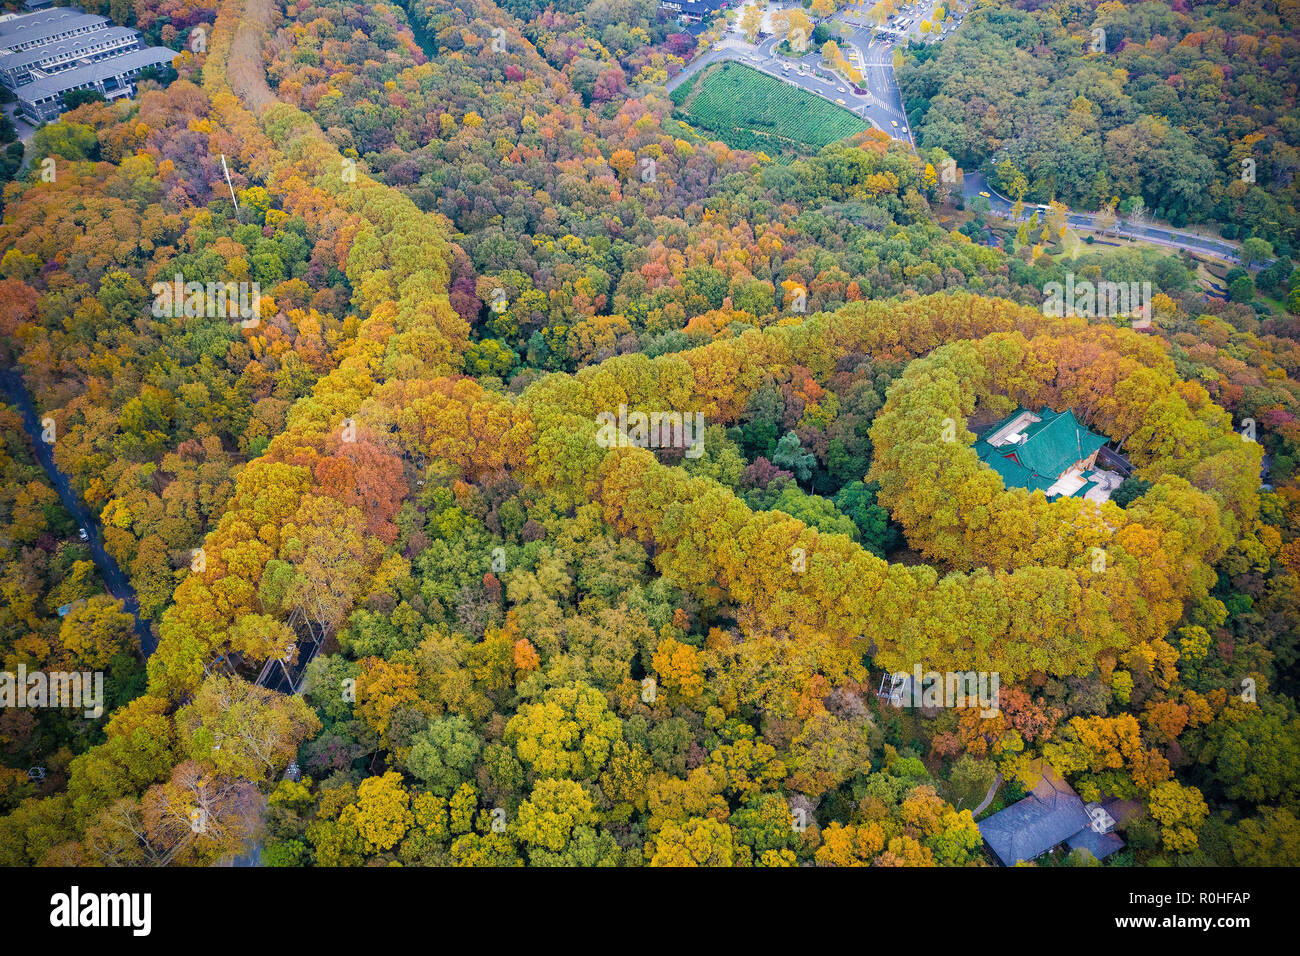 Nanjing, Nanjing, China. 5th Nov, 2018. Nanjing, CHINA-The aerial photography of May-ling Palace shows that a road with yellow-colored trees on the wayside leading to the residence looks like a necklace while the palace's roof looks just like a cut emerald at Zhongshan Scenic Area in Nanjing, China. The May-ling Palace, located in Nanjing, east ChinaÃ¢â‚¬â„¢s Jiangsu Province, was built in 1931 and served Chiang Kai-shek and his wife Soong May-ling. Credit: SIPA Asia/ZUMA Wire/Alamy Live News Stock Photo